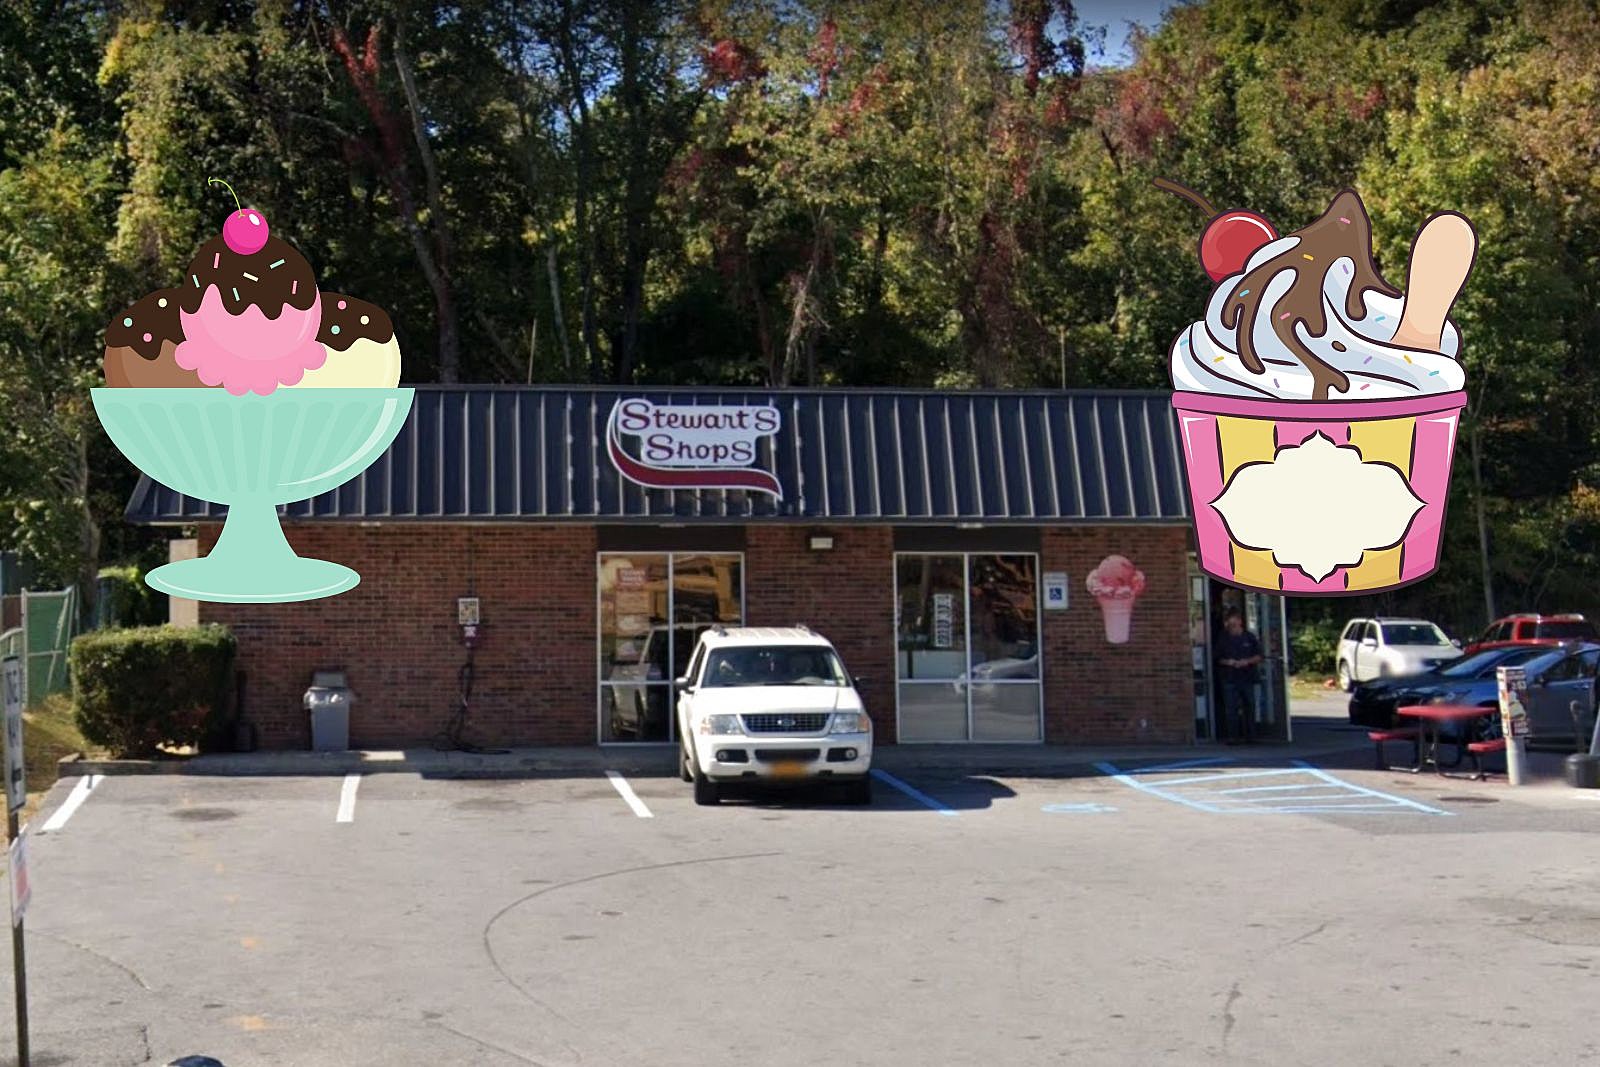 Stewart's releases five new ice cream flavors and brings back a